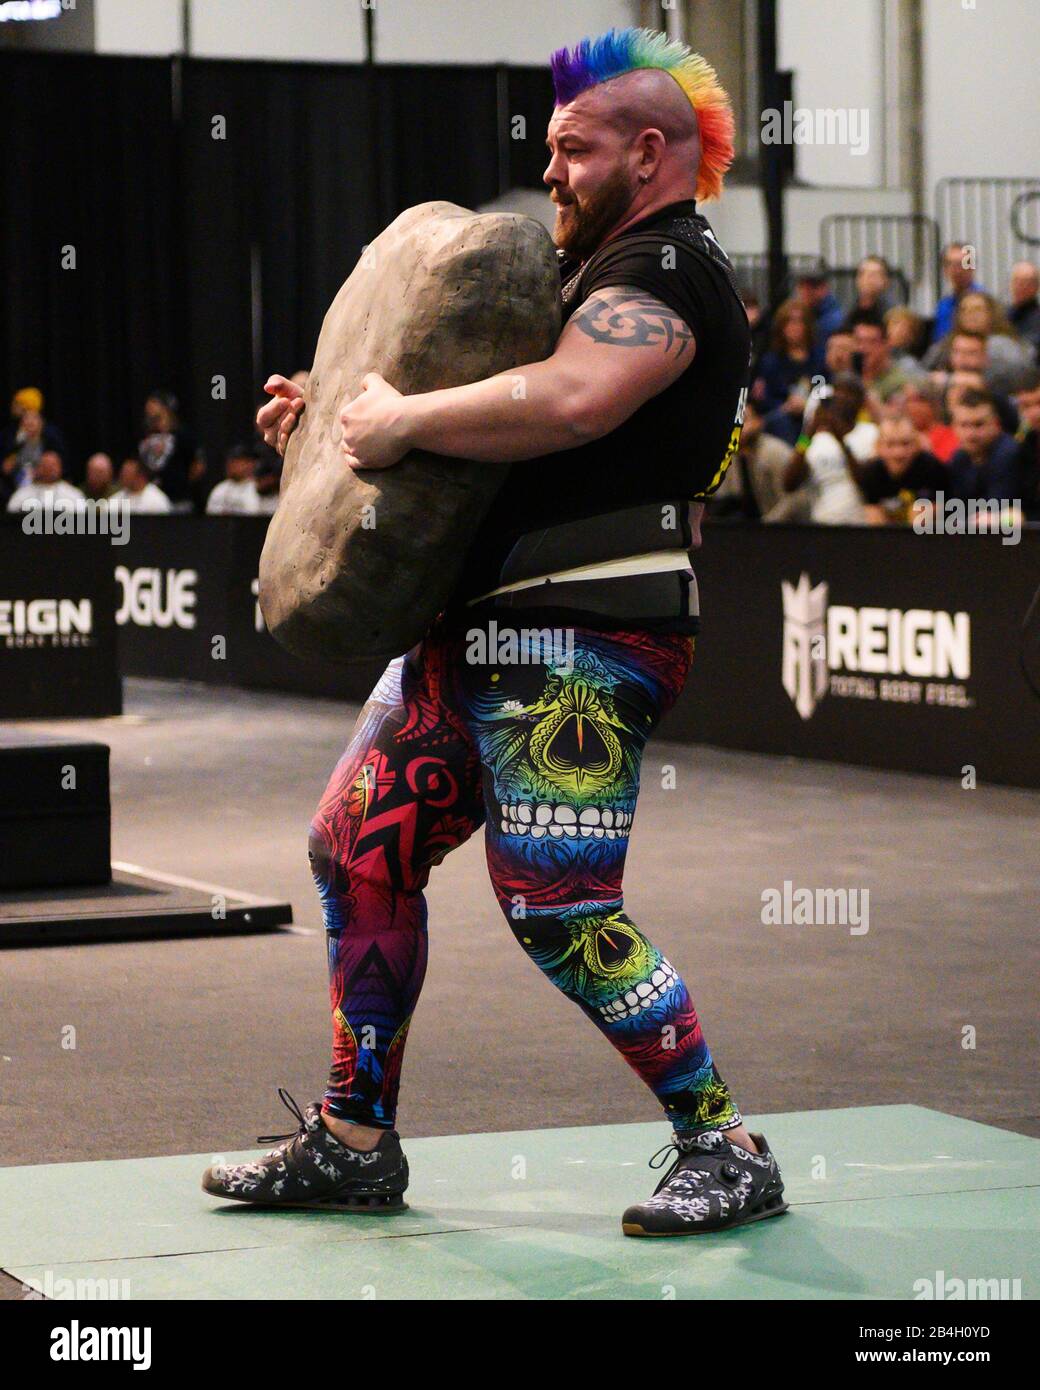 Columbus, Ohio, USA. 6th Mar, 2020. Rob Kearney competes in the hussafell  stone carry in the Arnold Strongman Classic at the Arnold Sports Festival  in Columbus, Ohio, USA. Columbus, Ohio, USA. Credit: